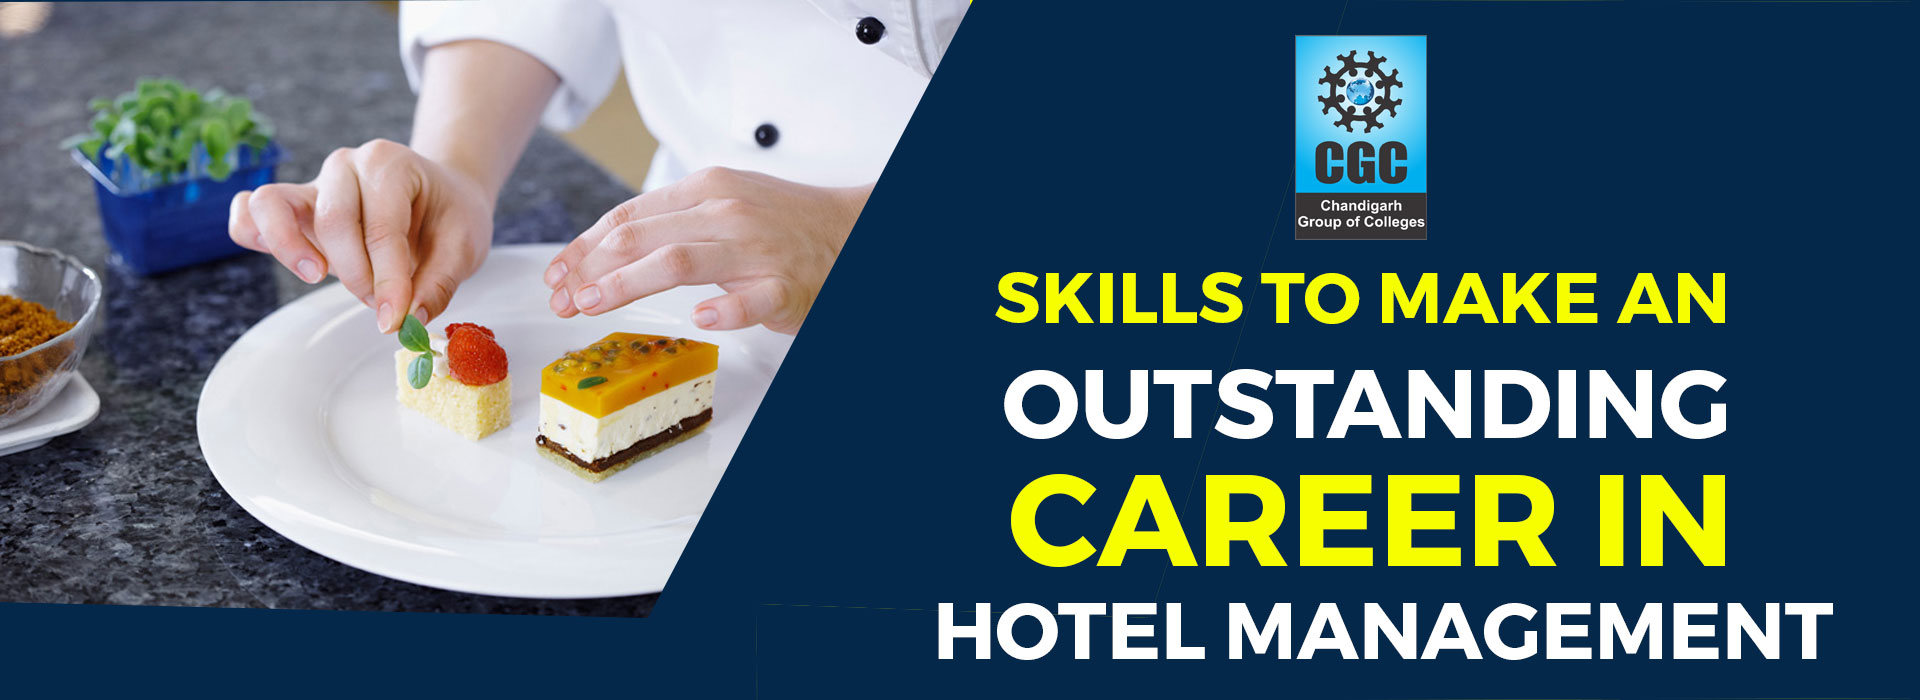 Skills to Make an Outstanding Career in Hotel Management 